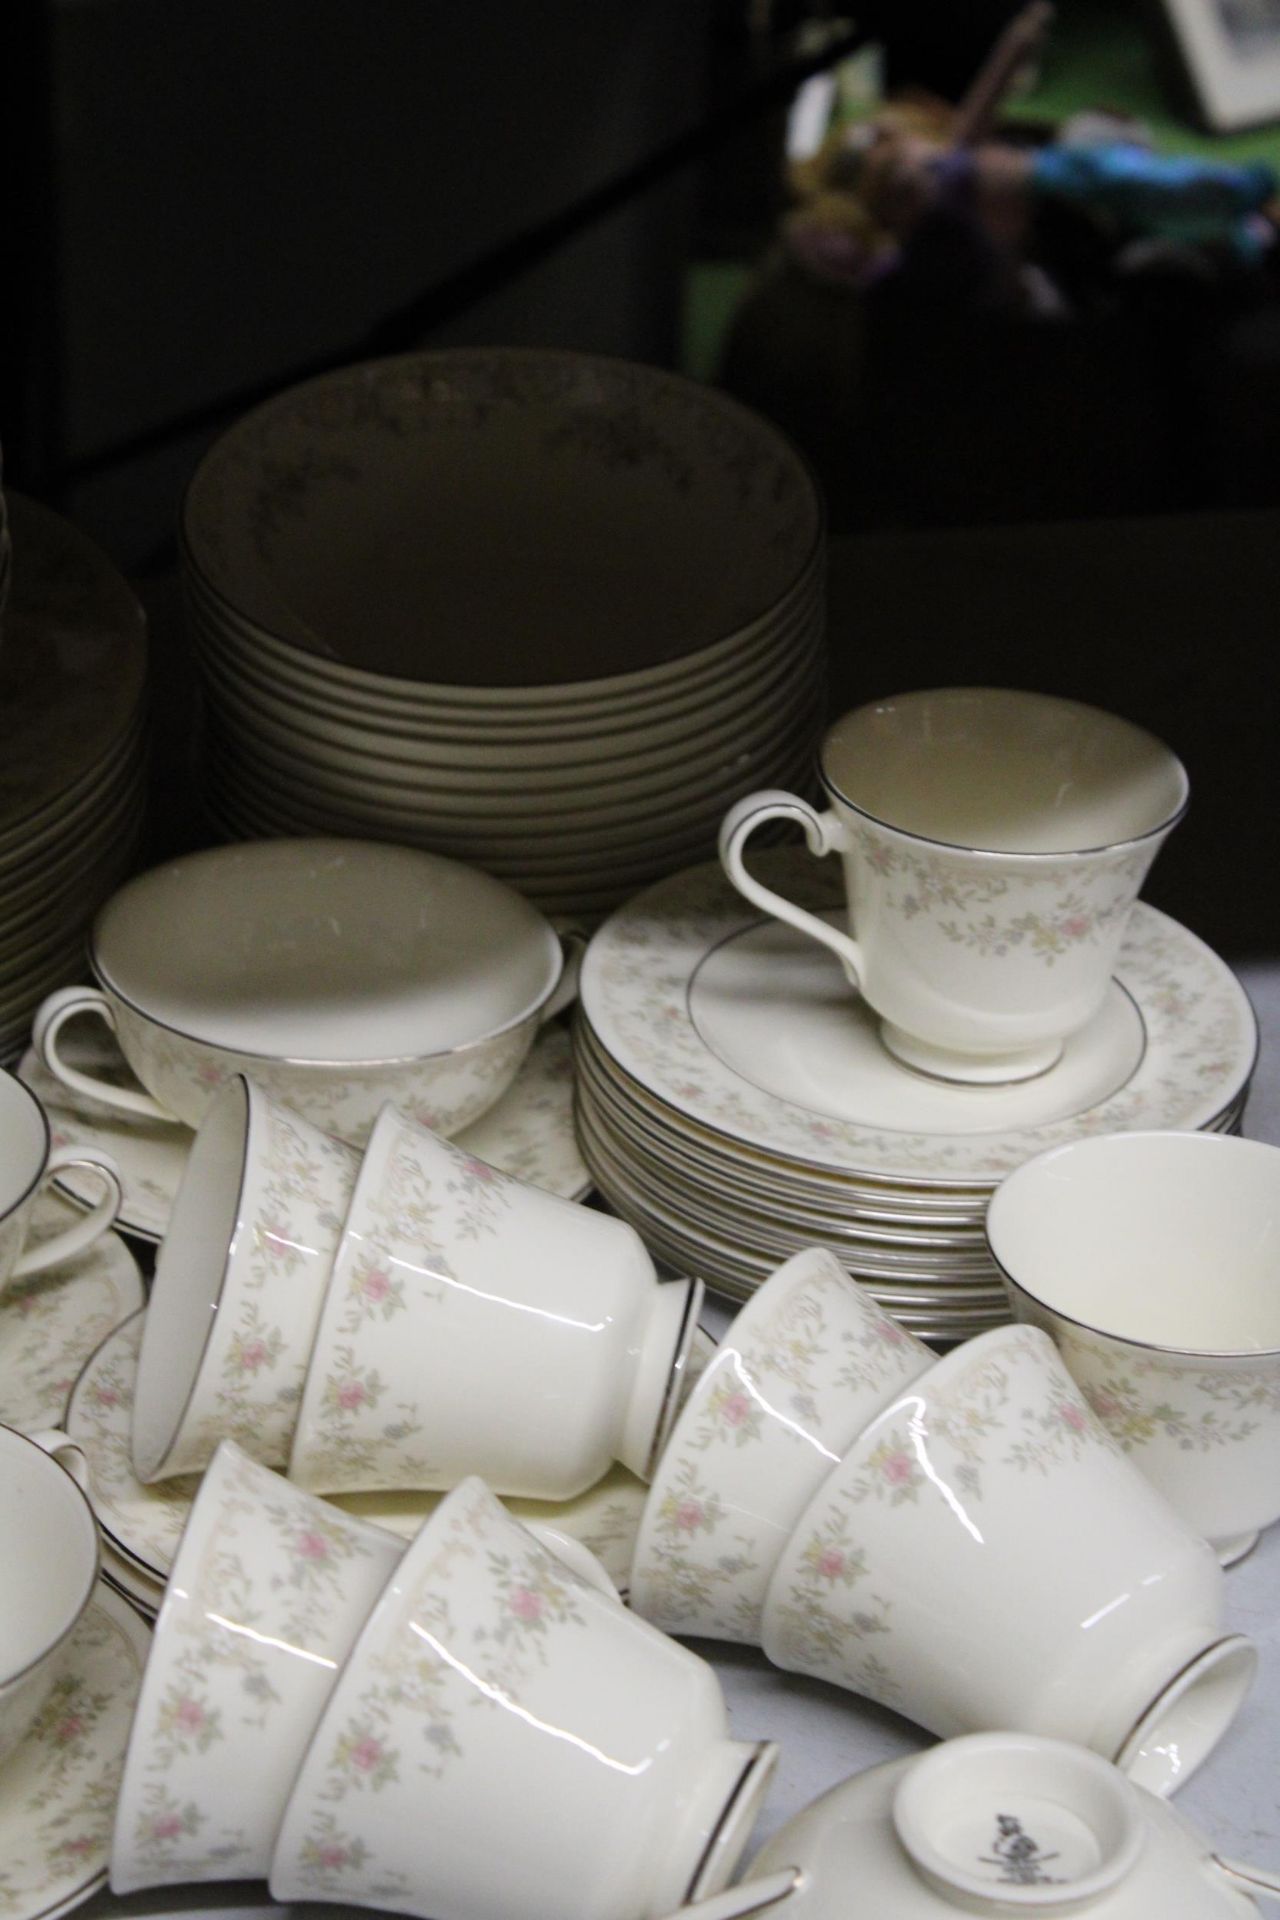 A ROYAL DOULTON 'DIANA' DINNER SERVICE TO INCLUDE SERVING TUREENS, VARIOUS SIZES OF PLATES, SOUP - Image 3 of 6